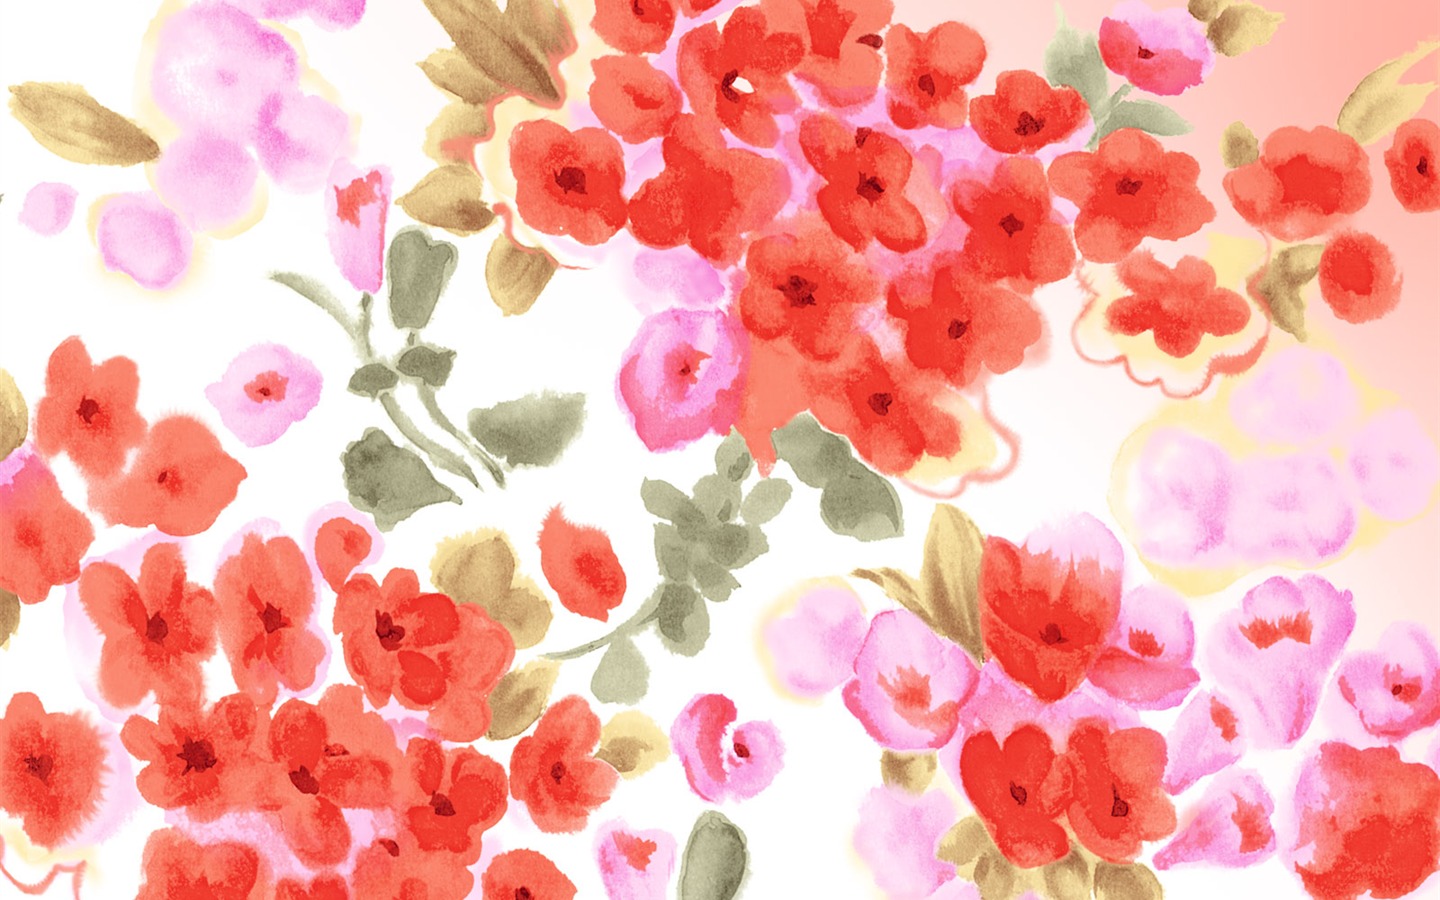 Synthetic Flower Wallpapers (2) #5 - 1440x900